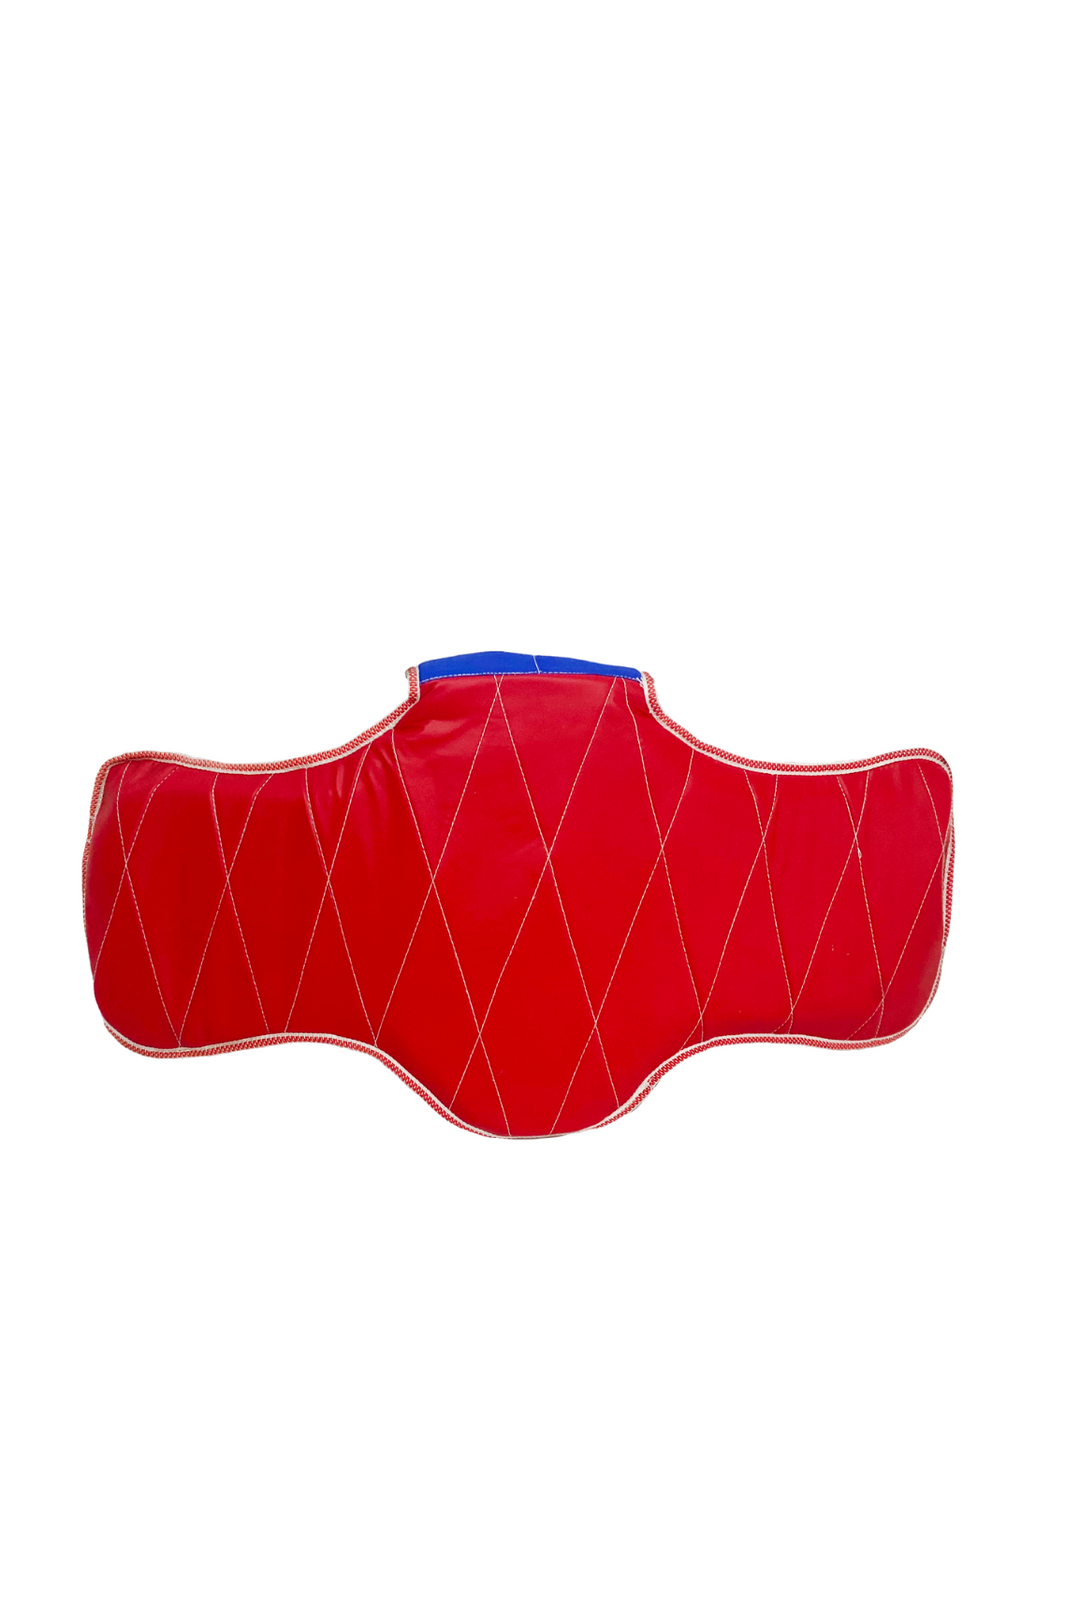 red and blue boxing kick shield